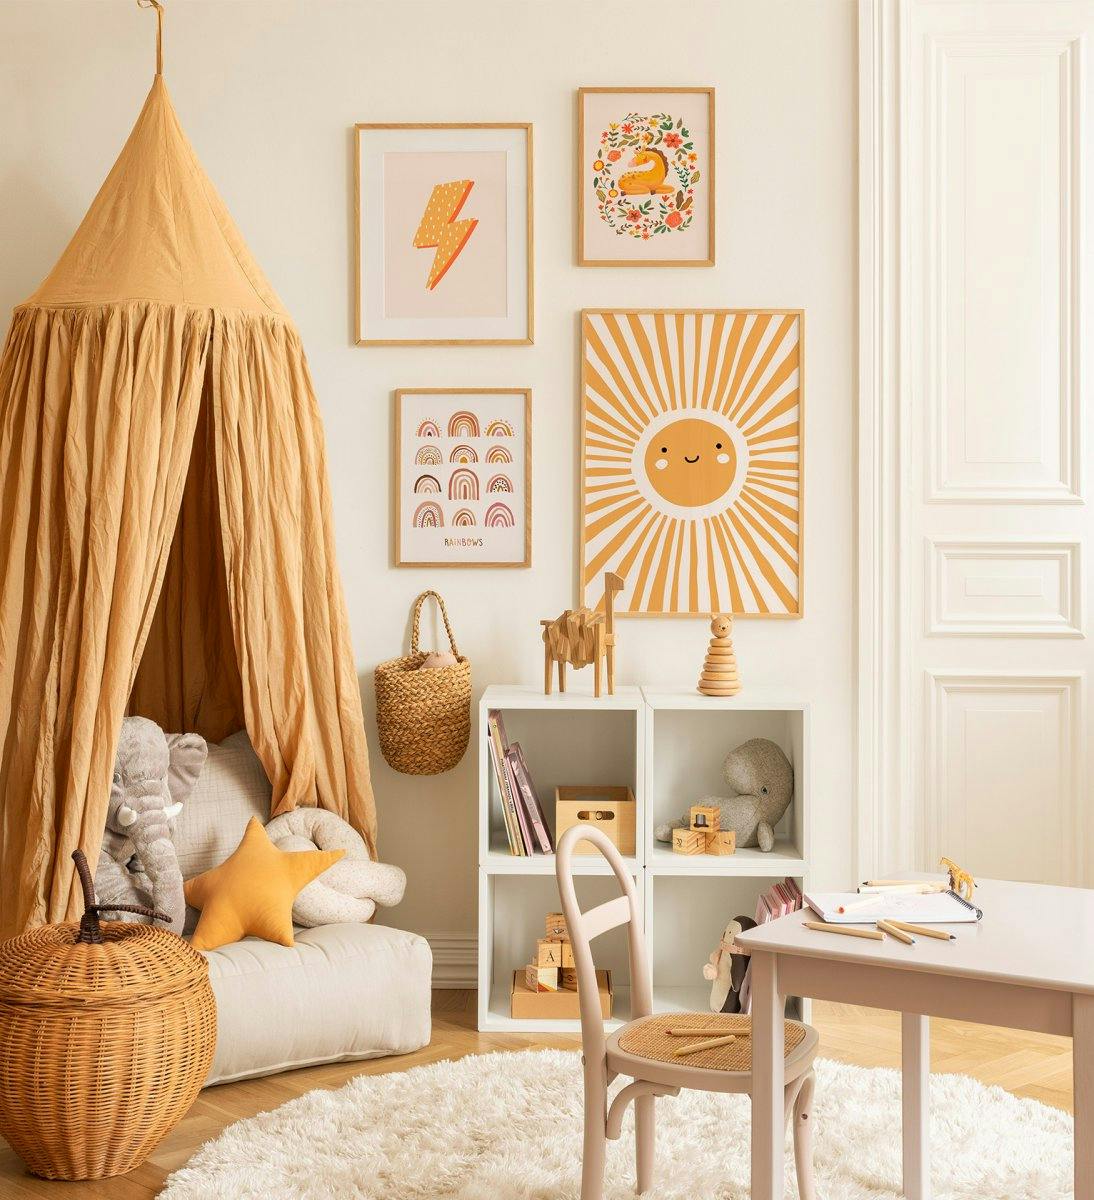 Gallery wall for the kid's room with animals and illustrations with an orange theme with oak frames for the children's room